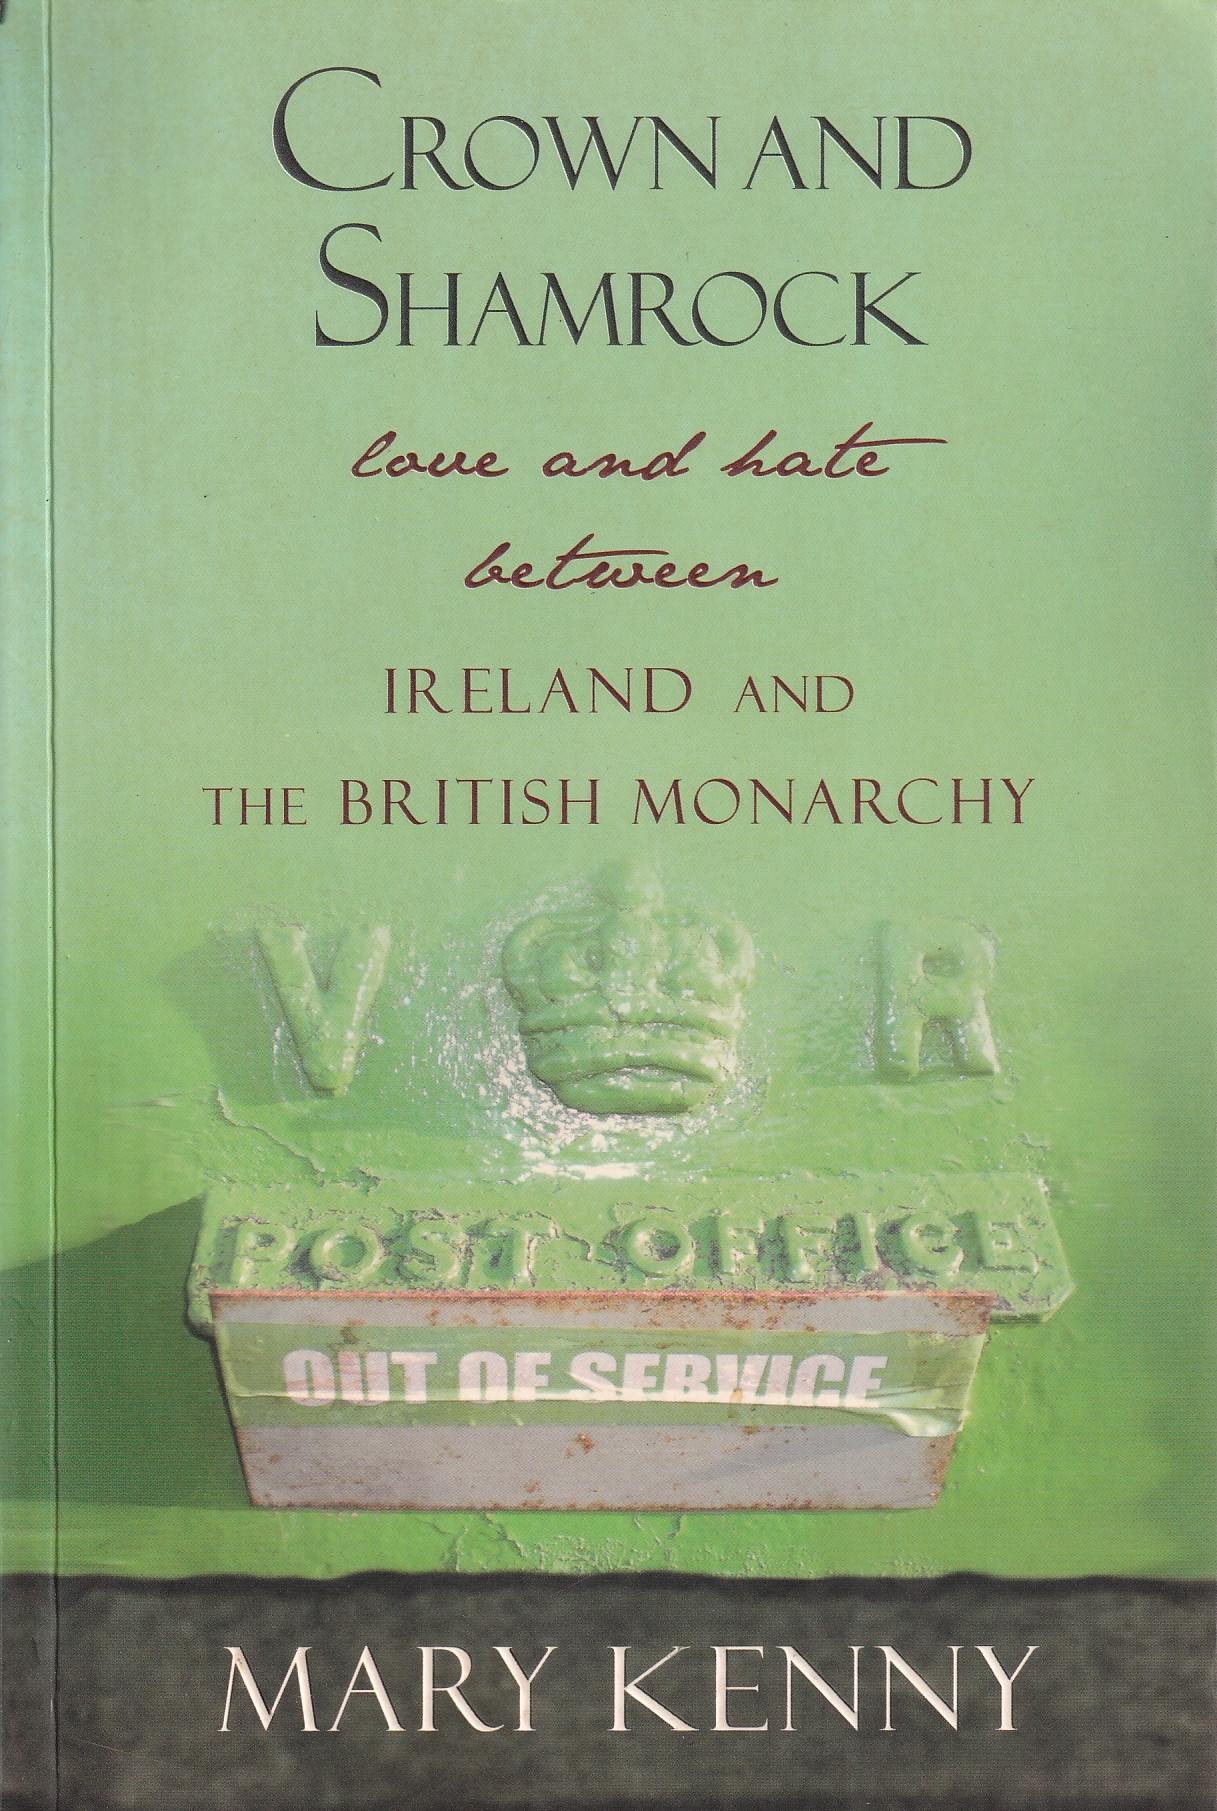 Crown and Shamrock: Love and Hate Between Ireland and the British Monarchy by Mary Kenny